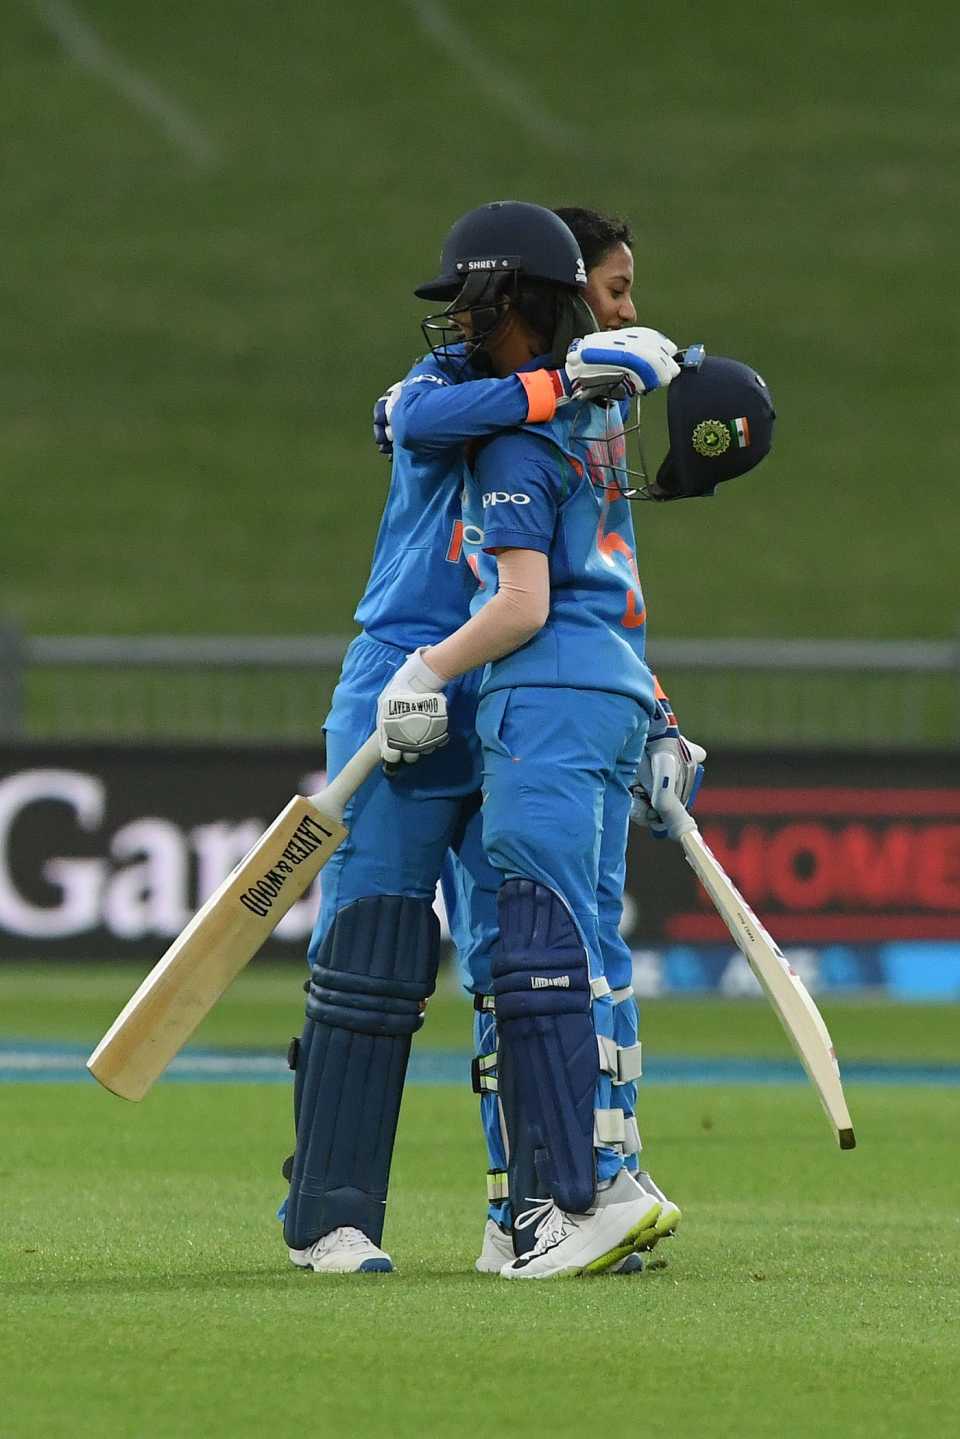 Mandhana and Rodrigues added 190 runs for the first wicket, New Zealand v India, 1st women's ODI, Napier, January 24, 2019